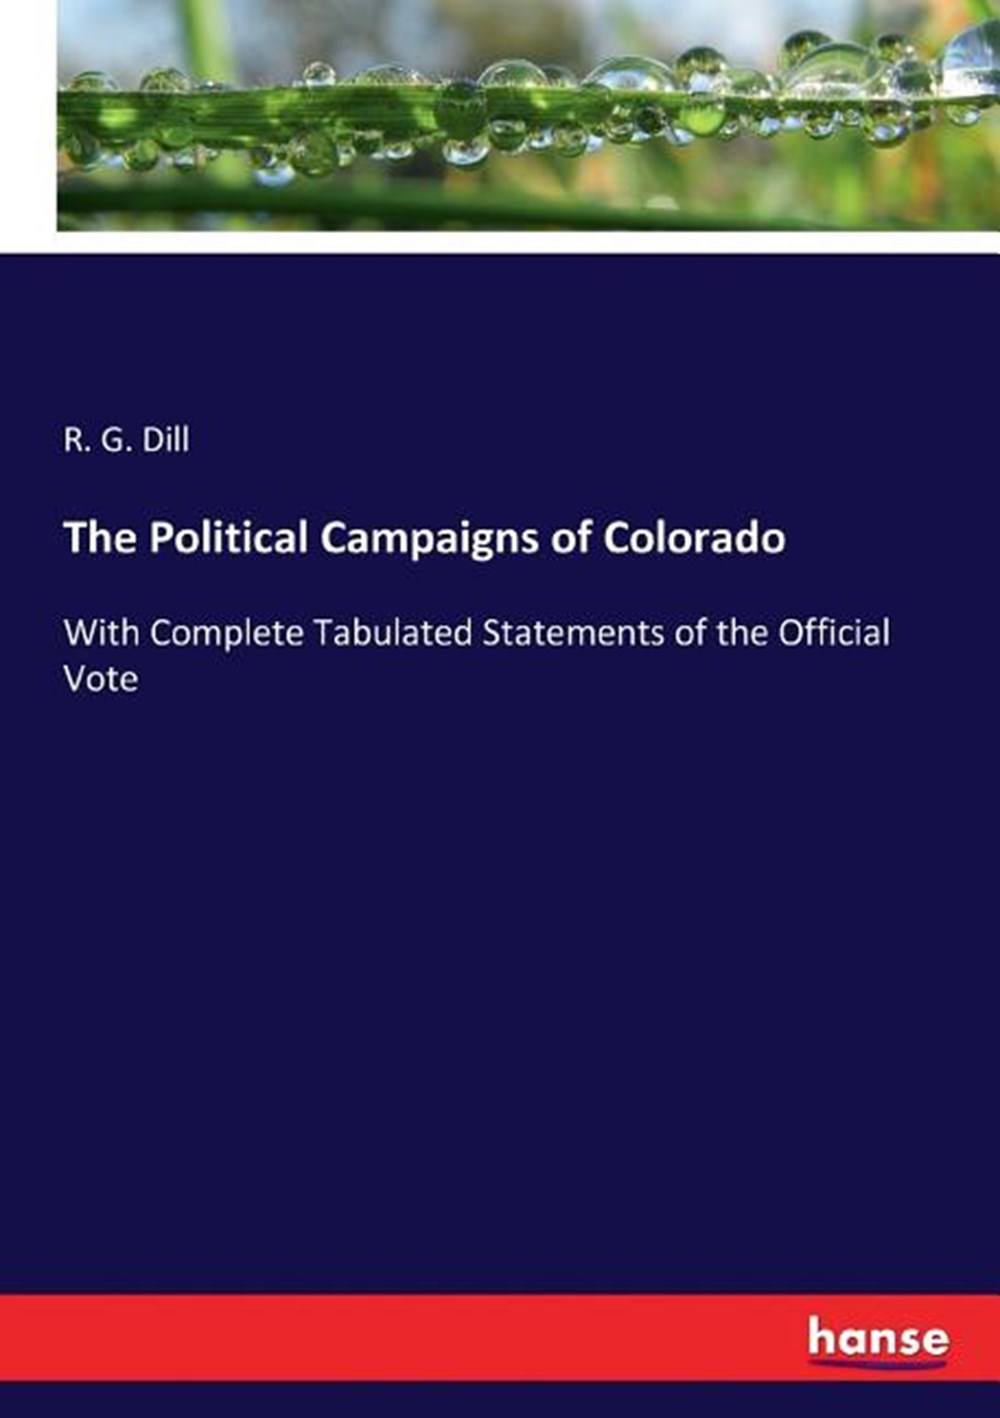 Political Campaigns of Colorado: With Complete Tabulated Statements of the Official Vote